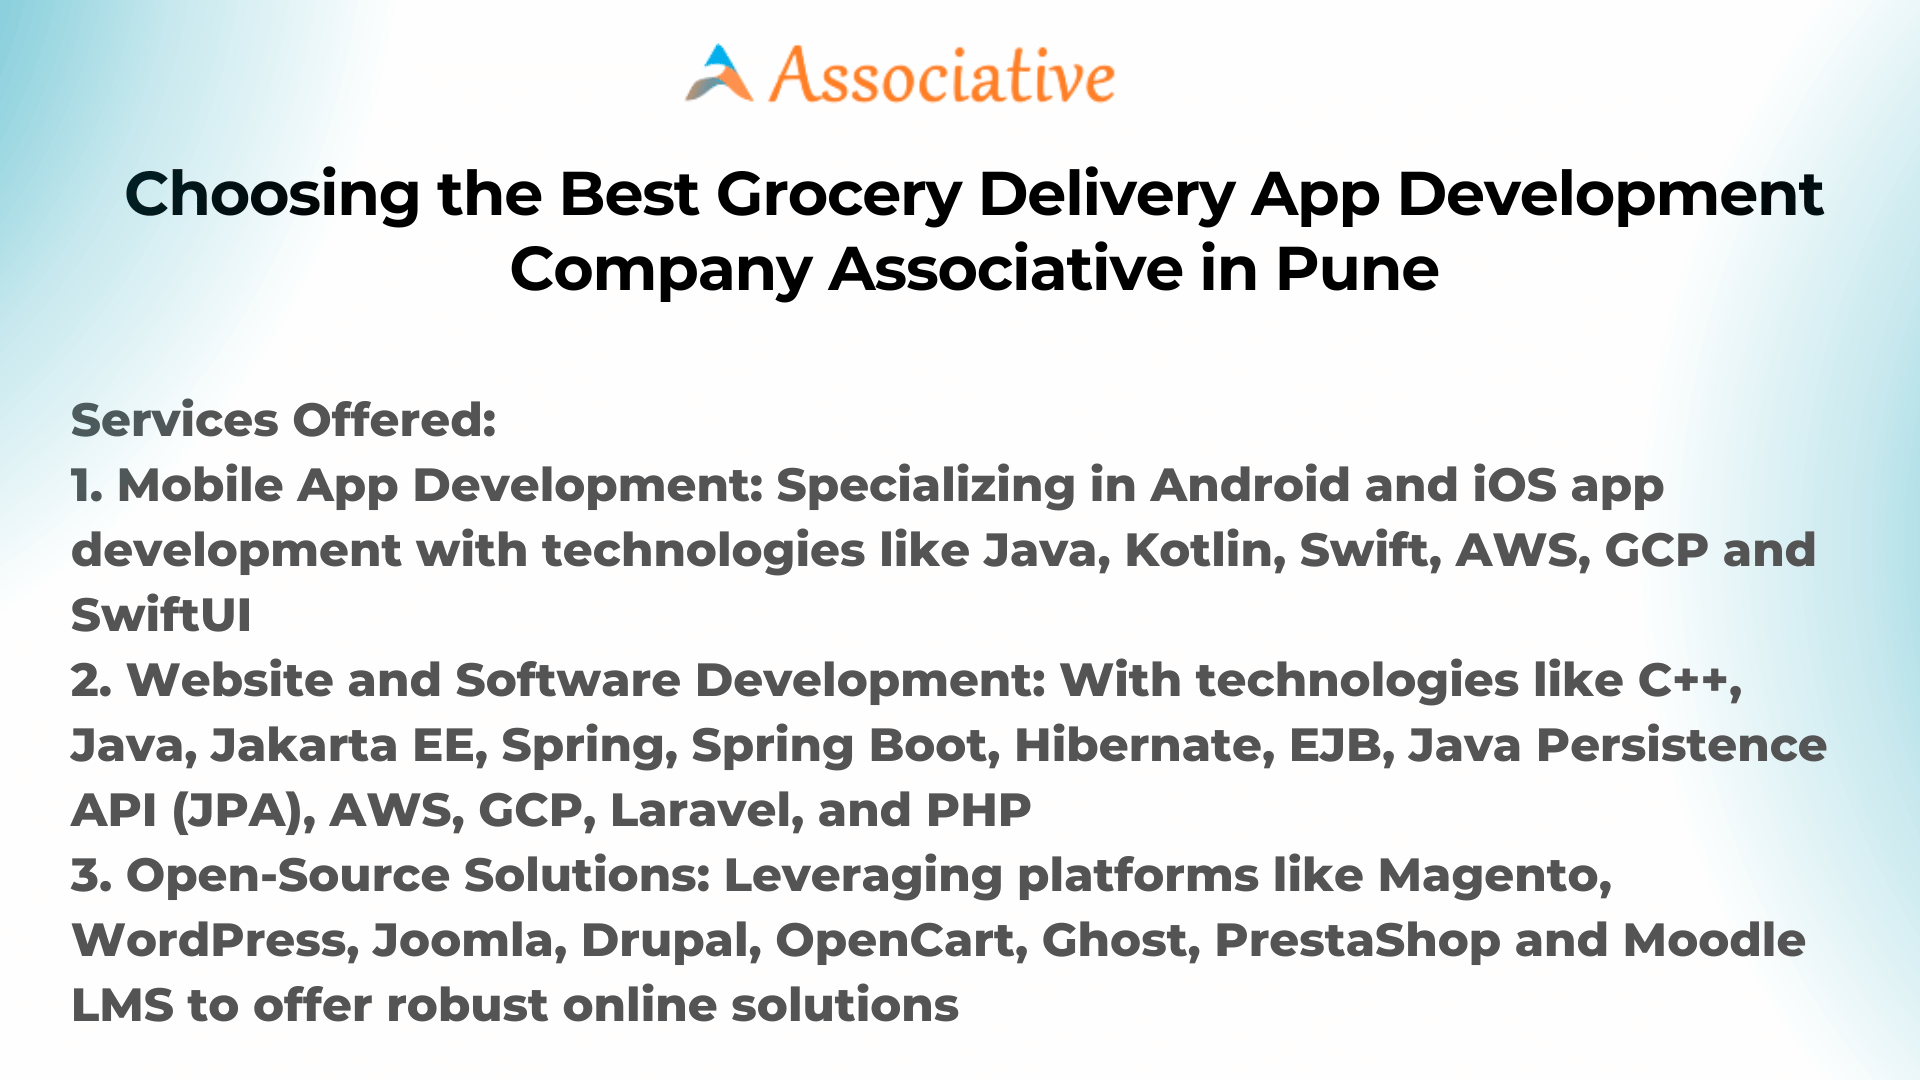 Choosing the Best Grocery Delivery App Development Company Associative in Pune